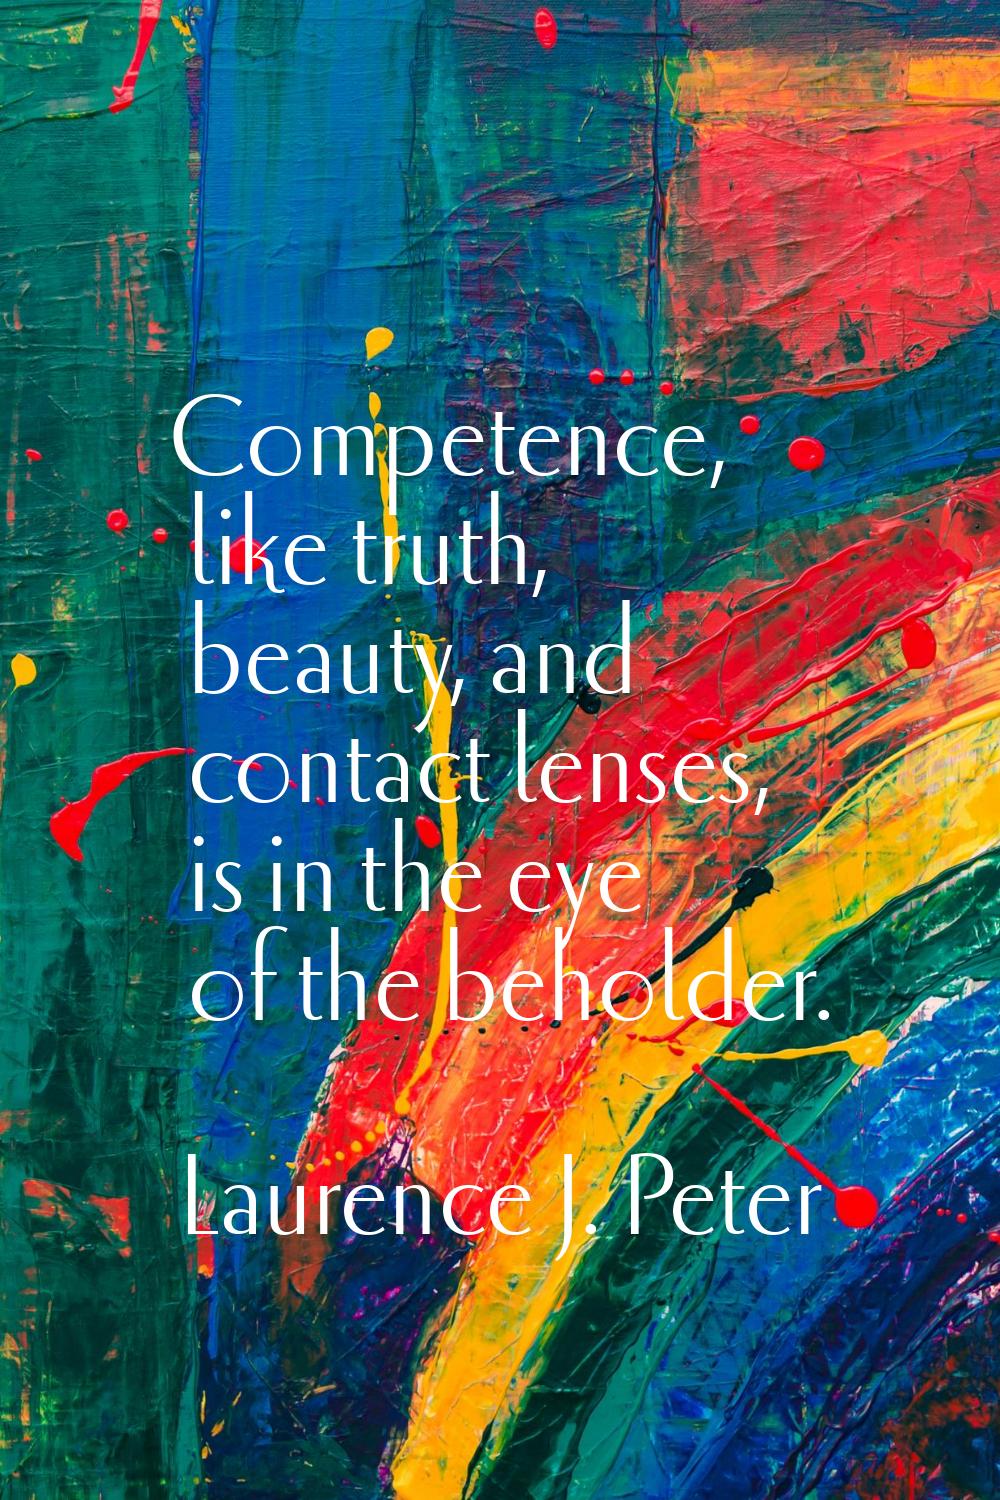 Competence, like truth, beauty, and contact lenses, is in the eye of the beholder.